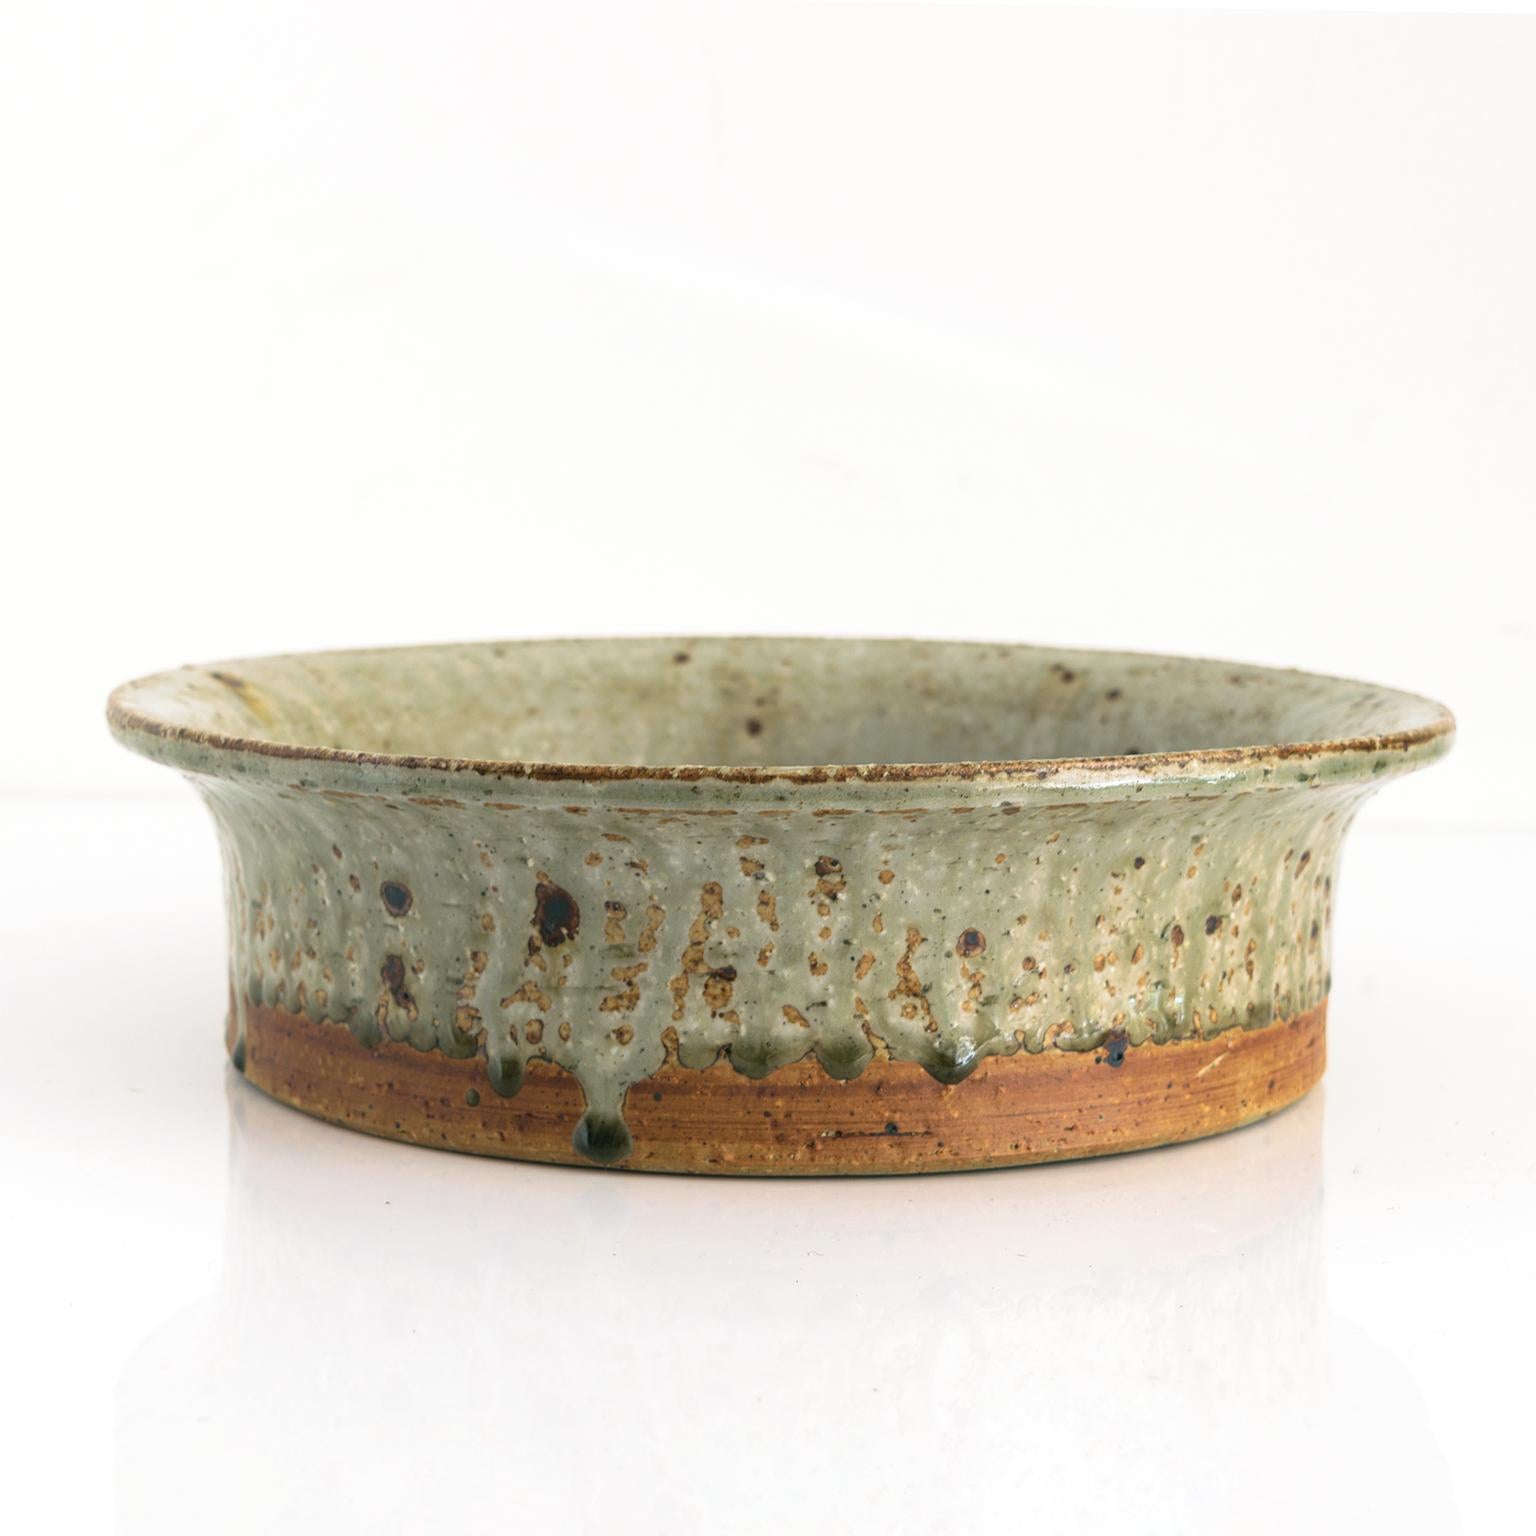 Hand-Crafted Marianne Westman for Rōrstrand Ateljé Glazed Stoneware Bowl, Signed For Sale